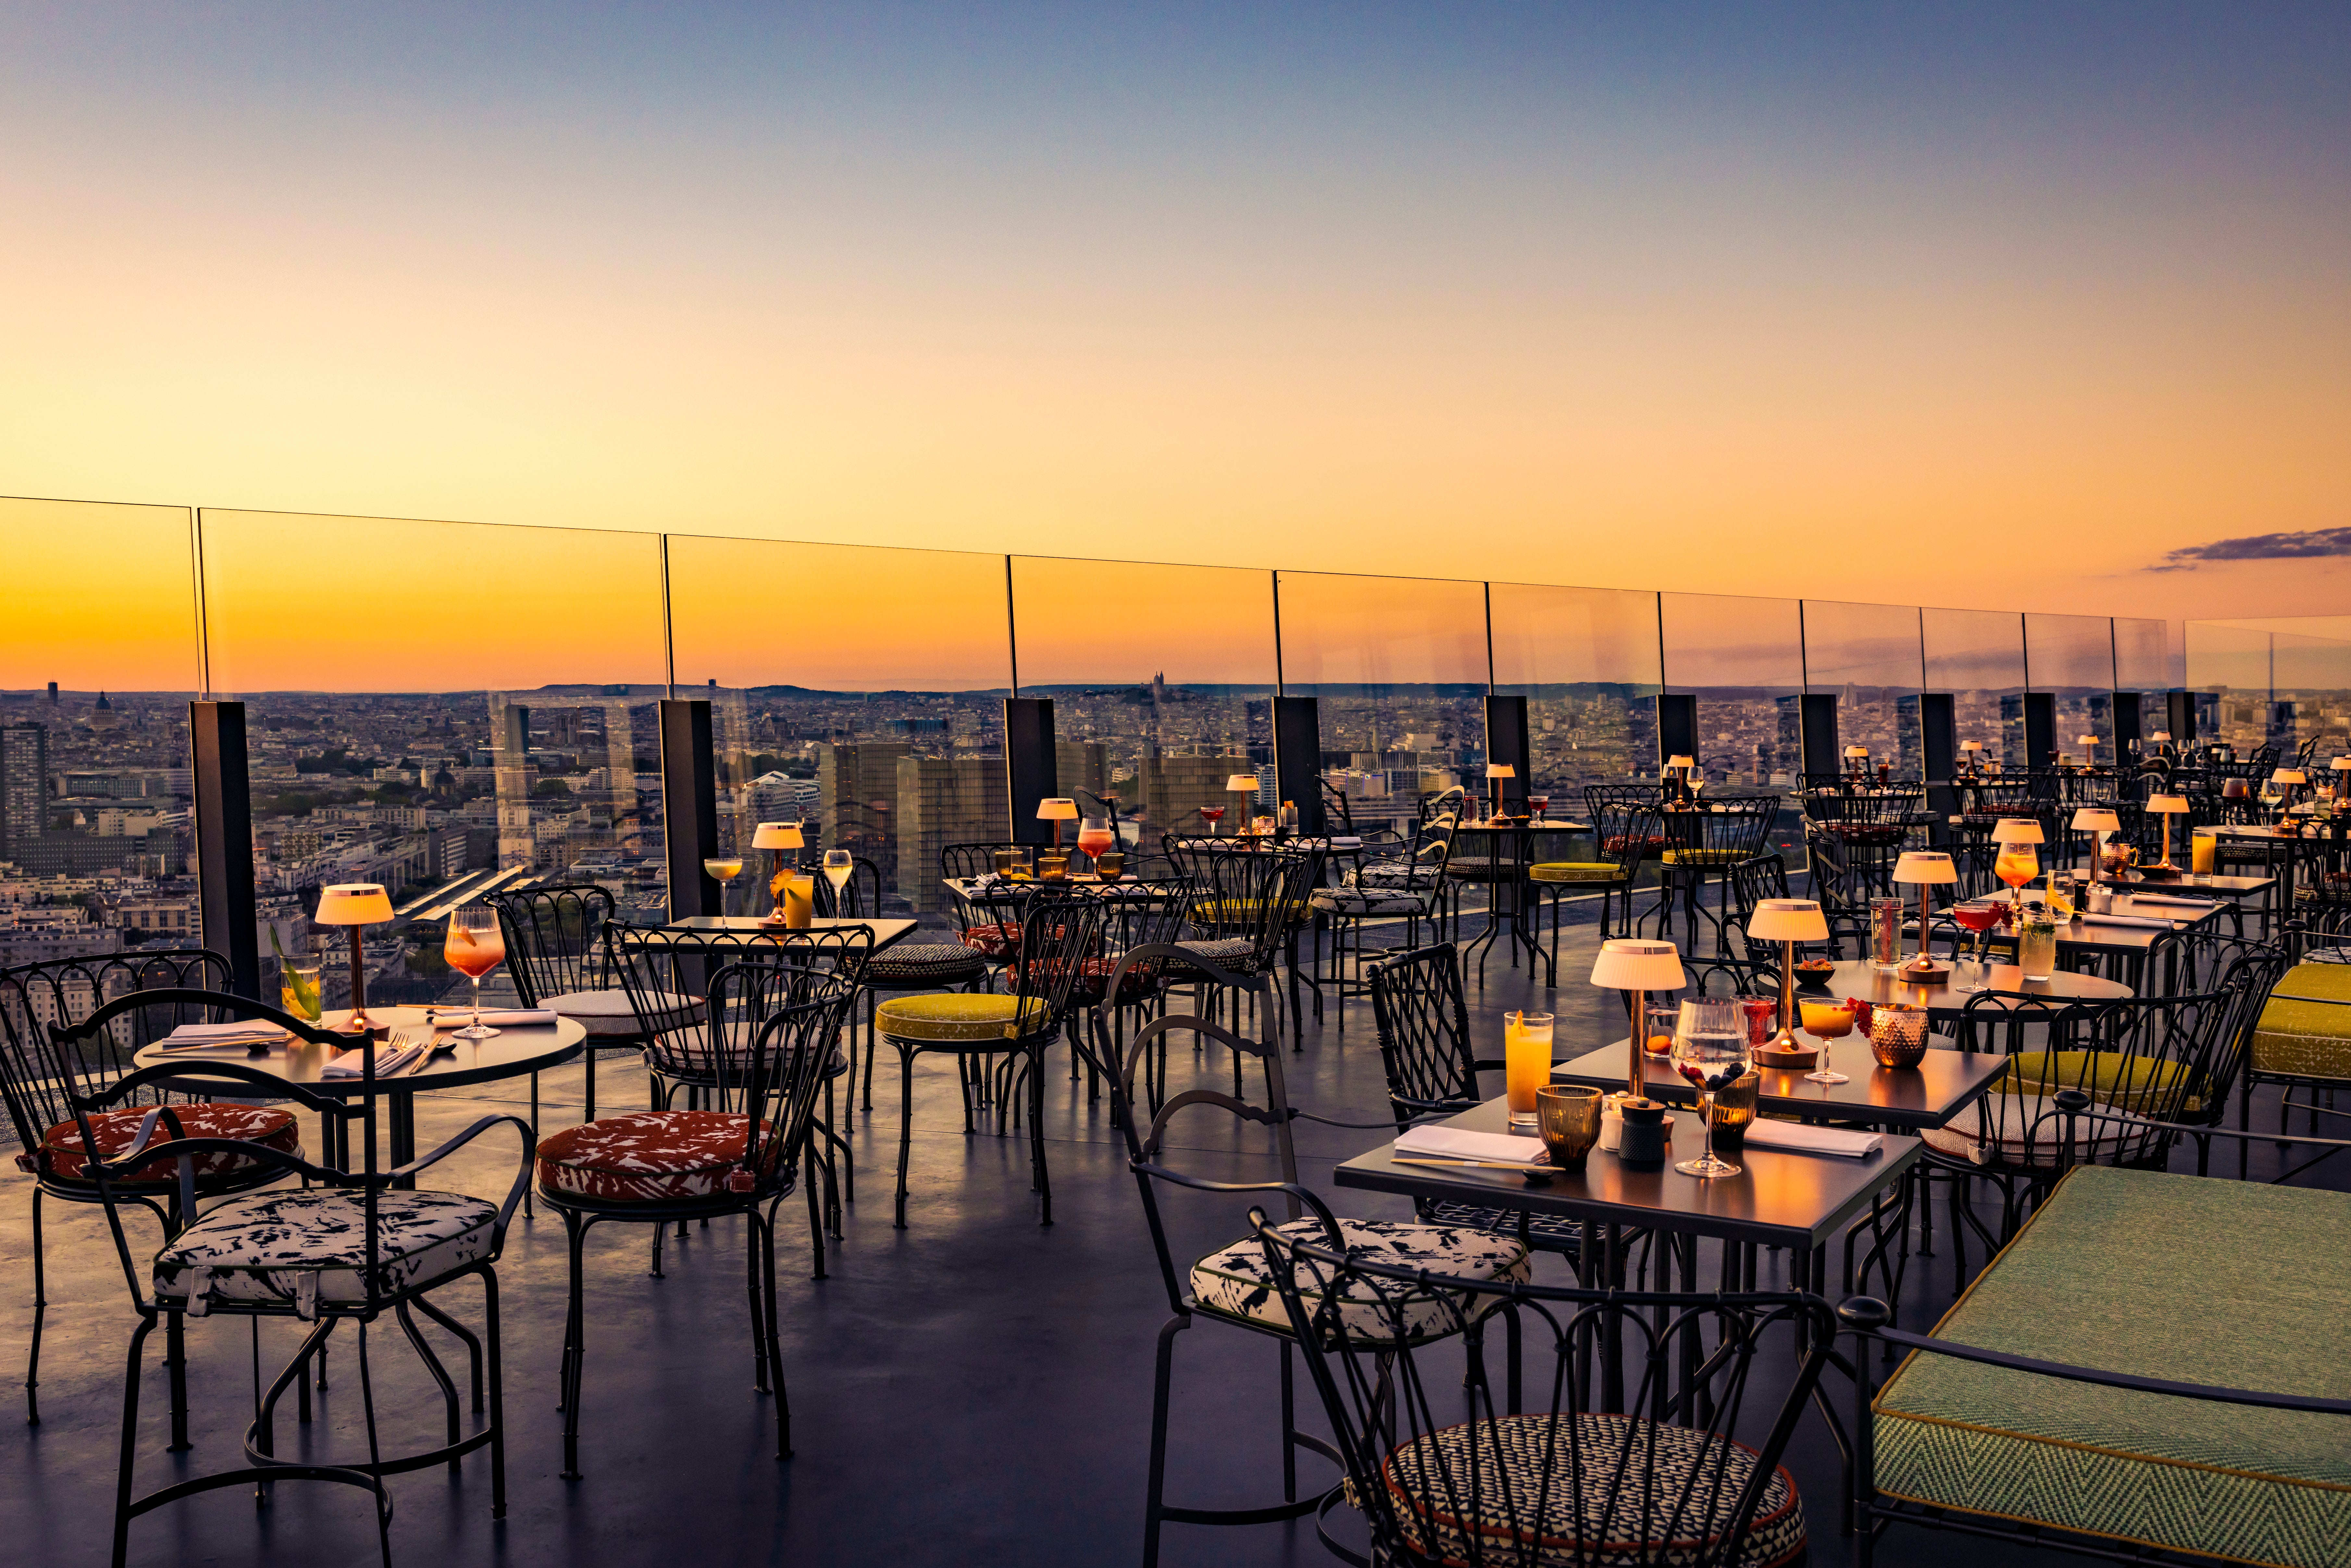 The restaurant at TOO Hotel boasts sweeping views over the city